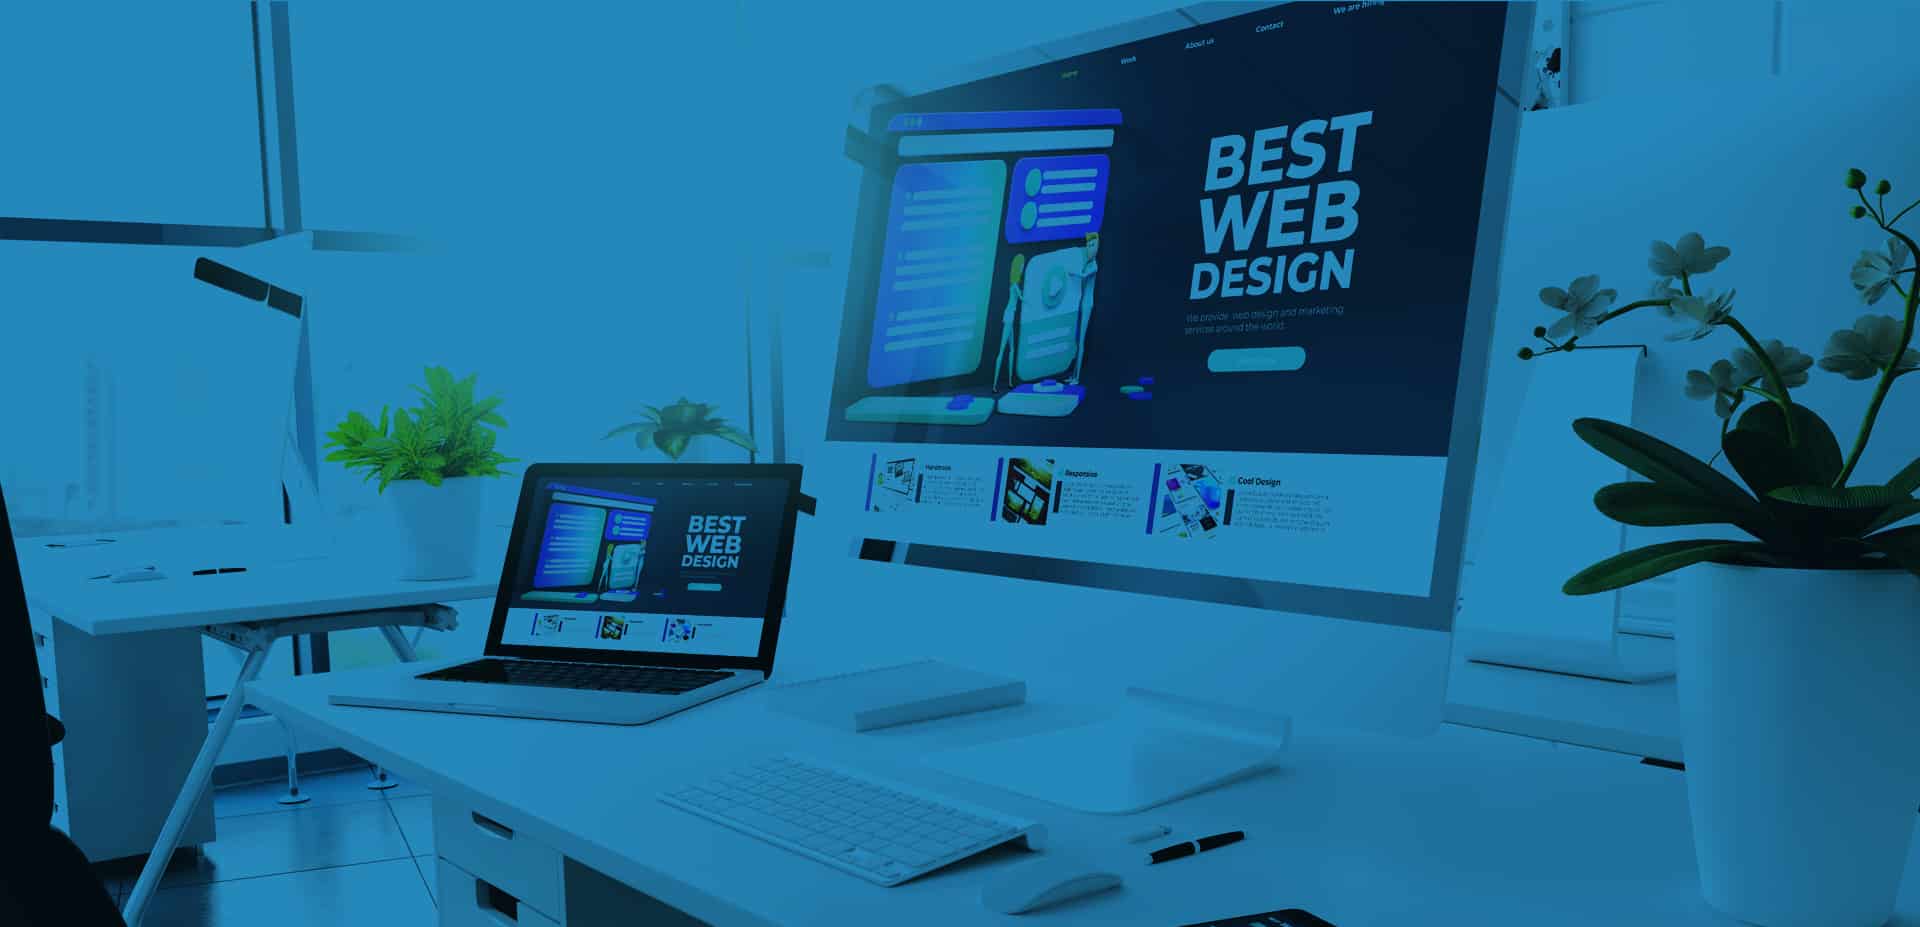 Get Ahead of the Curve: Use These Hot 2022 Web Design Trends on Your Landing Pages